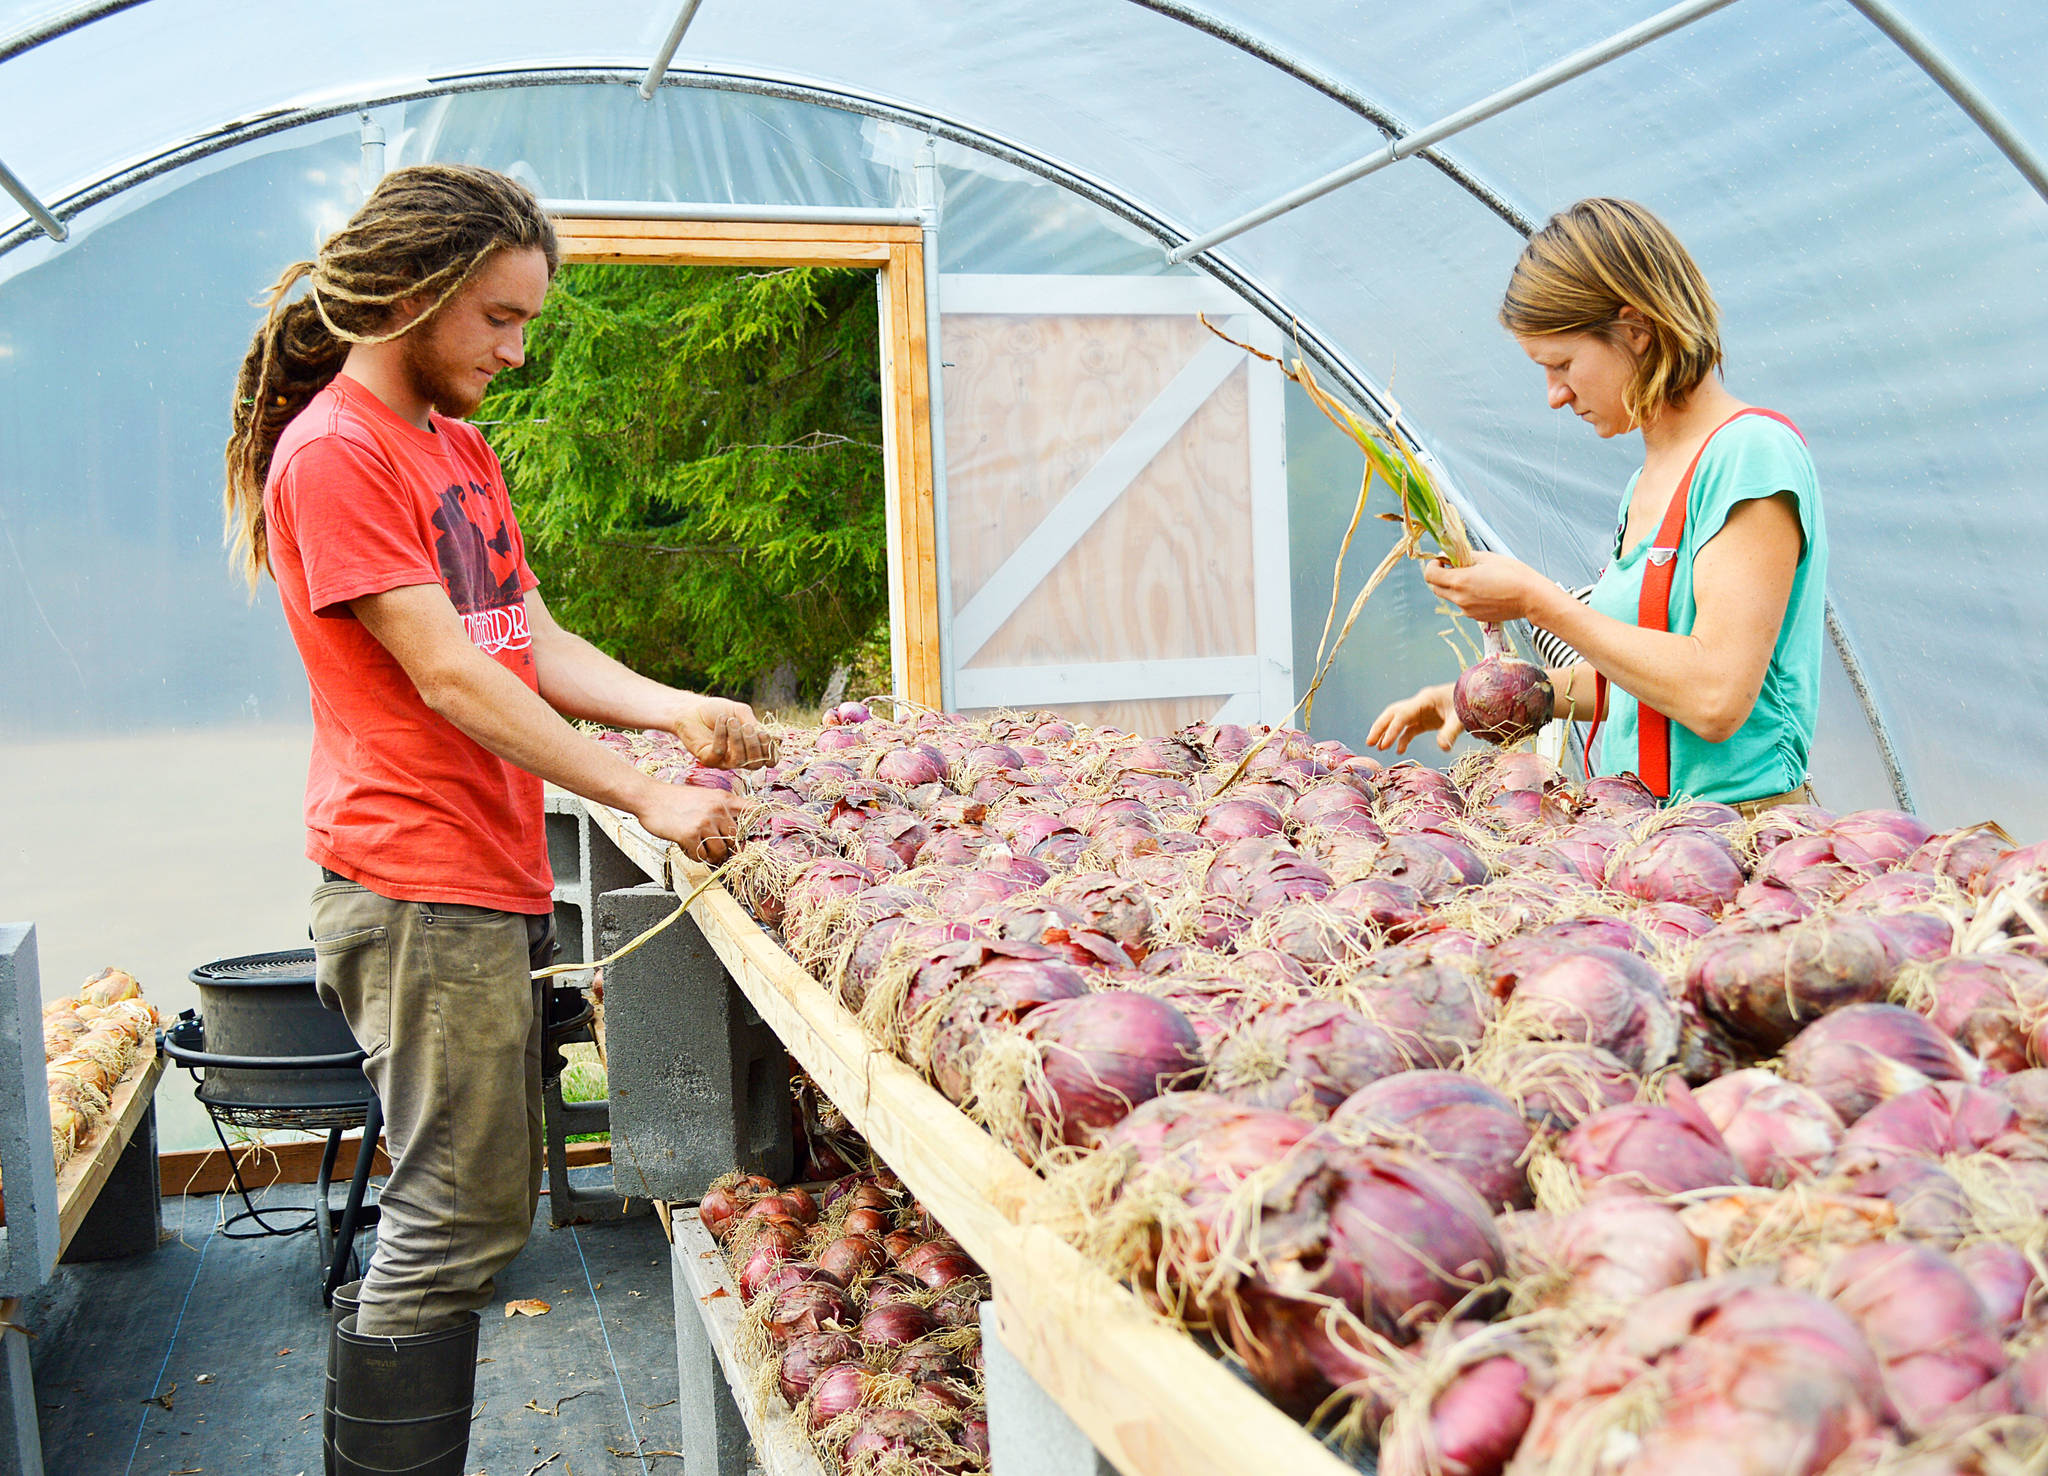 Seth Campbell and Kylie Neal sort through drying onions at Kettle’s Edge Farm Monday. The farm is one of several local organizations participating in Whidbey Island Grown Week, which runs from Sept. 39-Oct. 8. Photo by Laura Guido/Whidbey News-Times